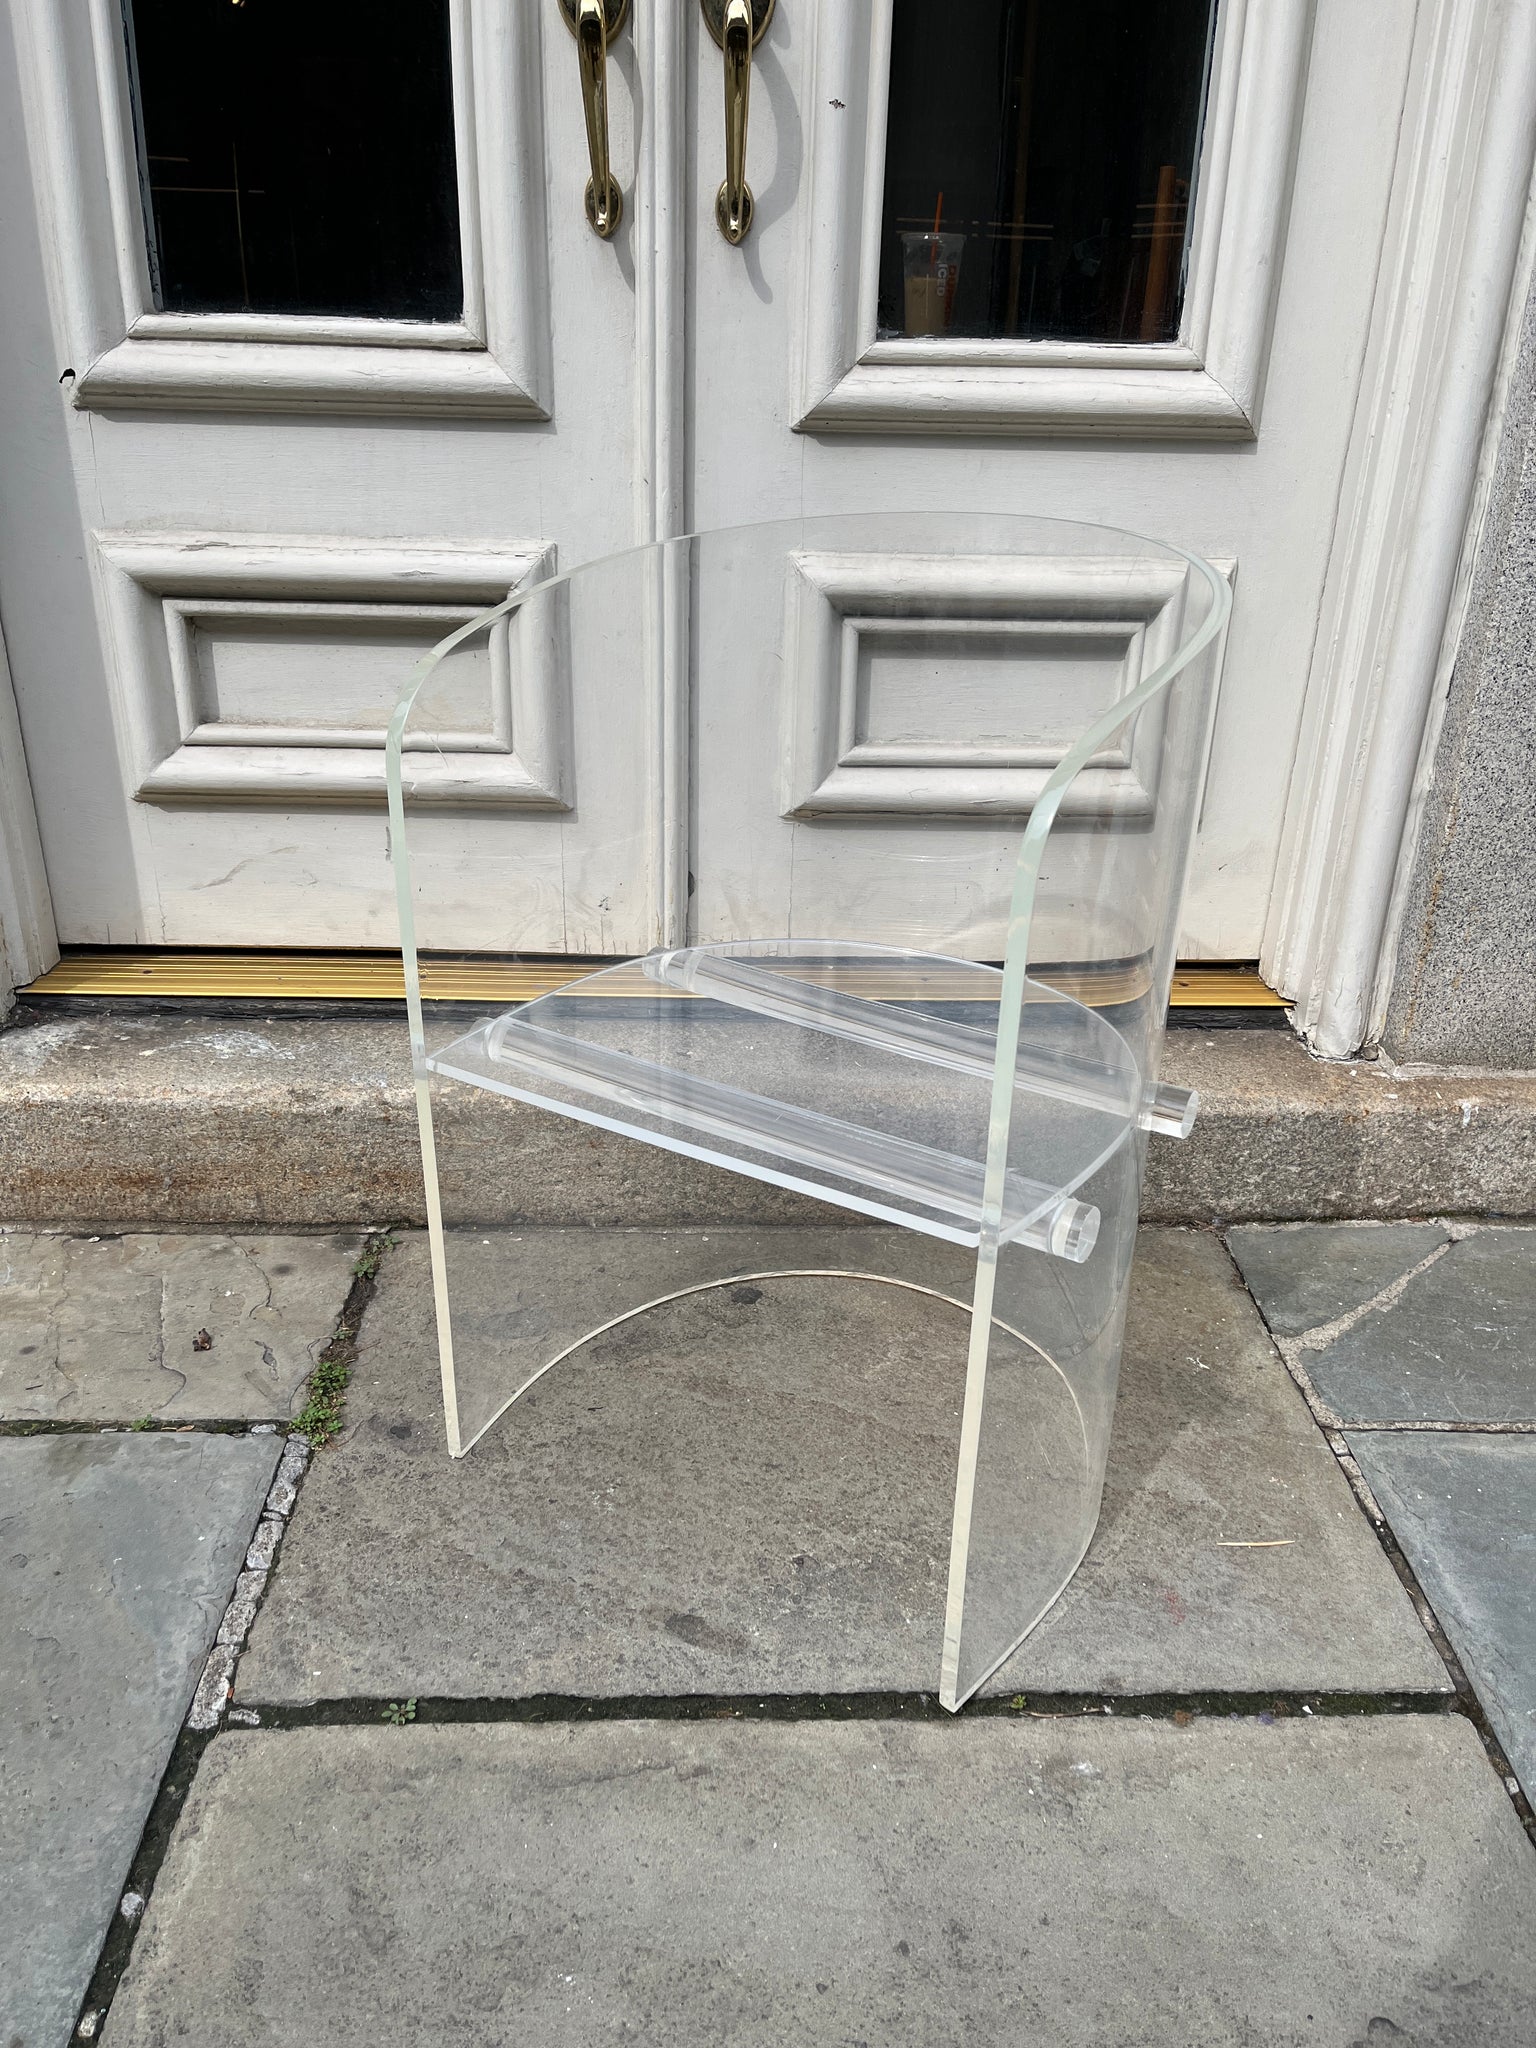 Lucite Barrel Back Chair